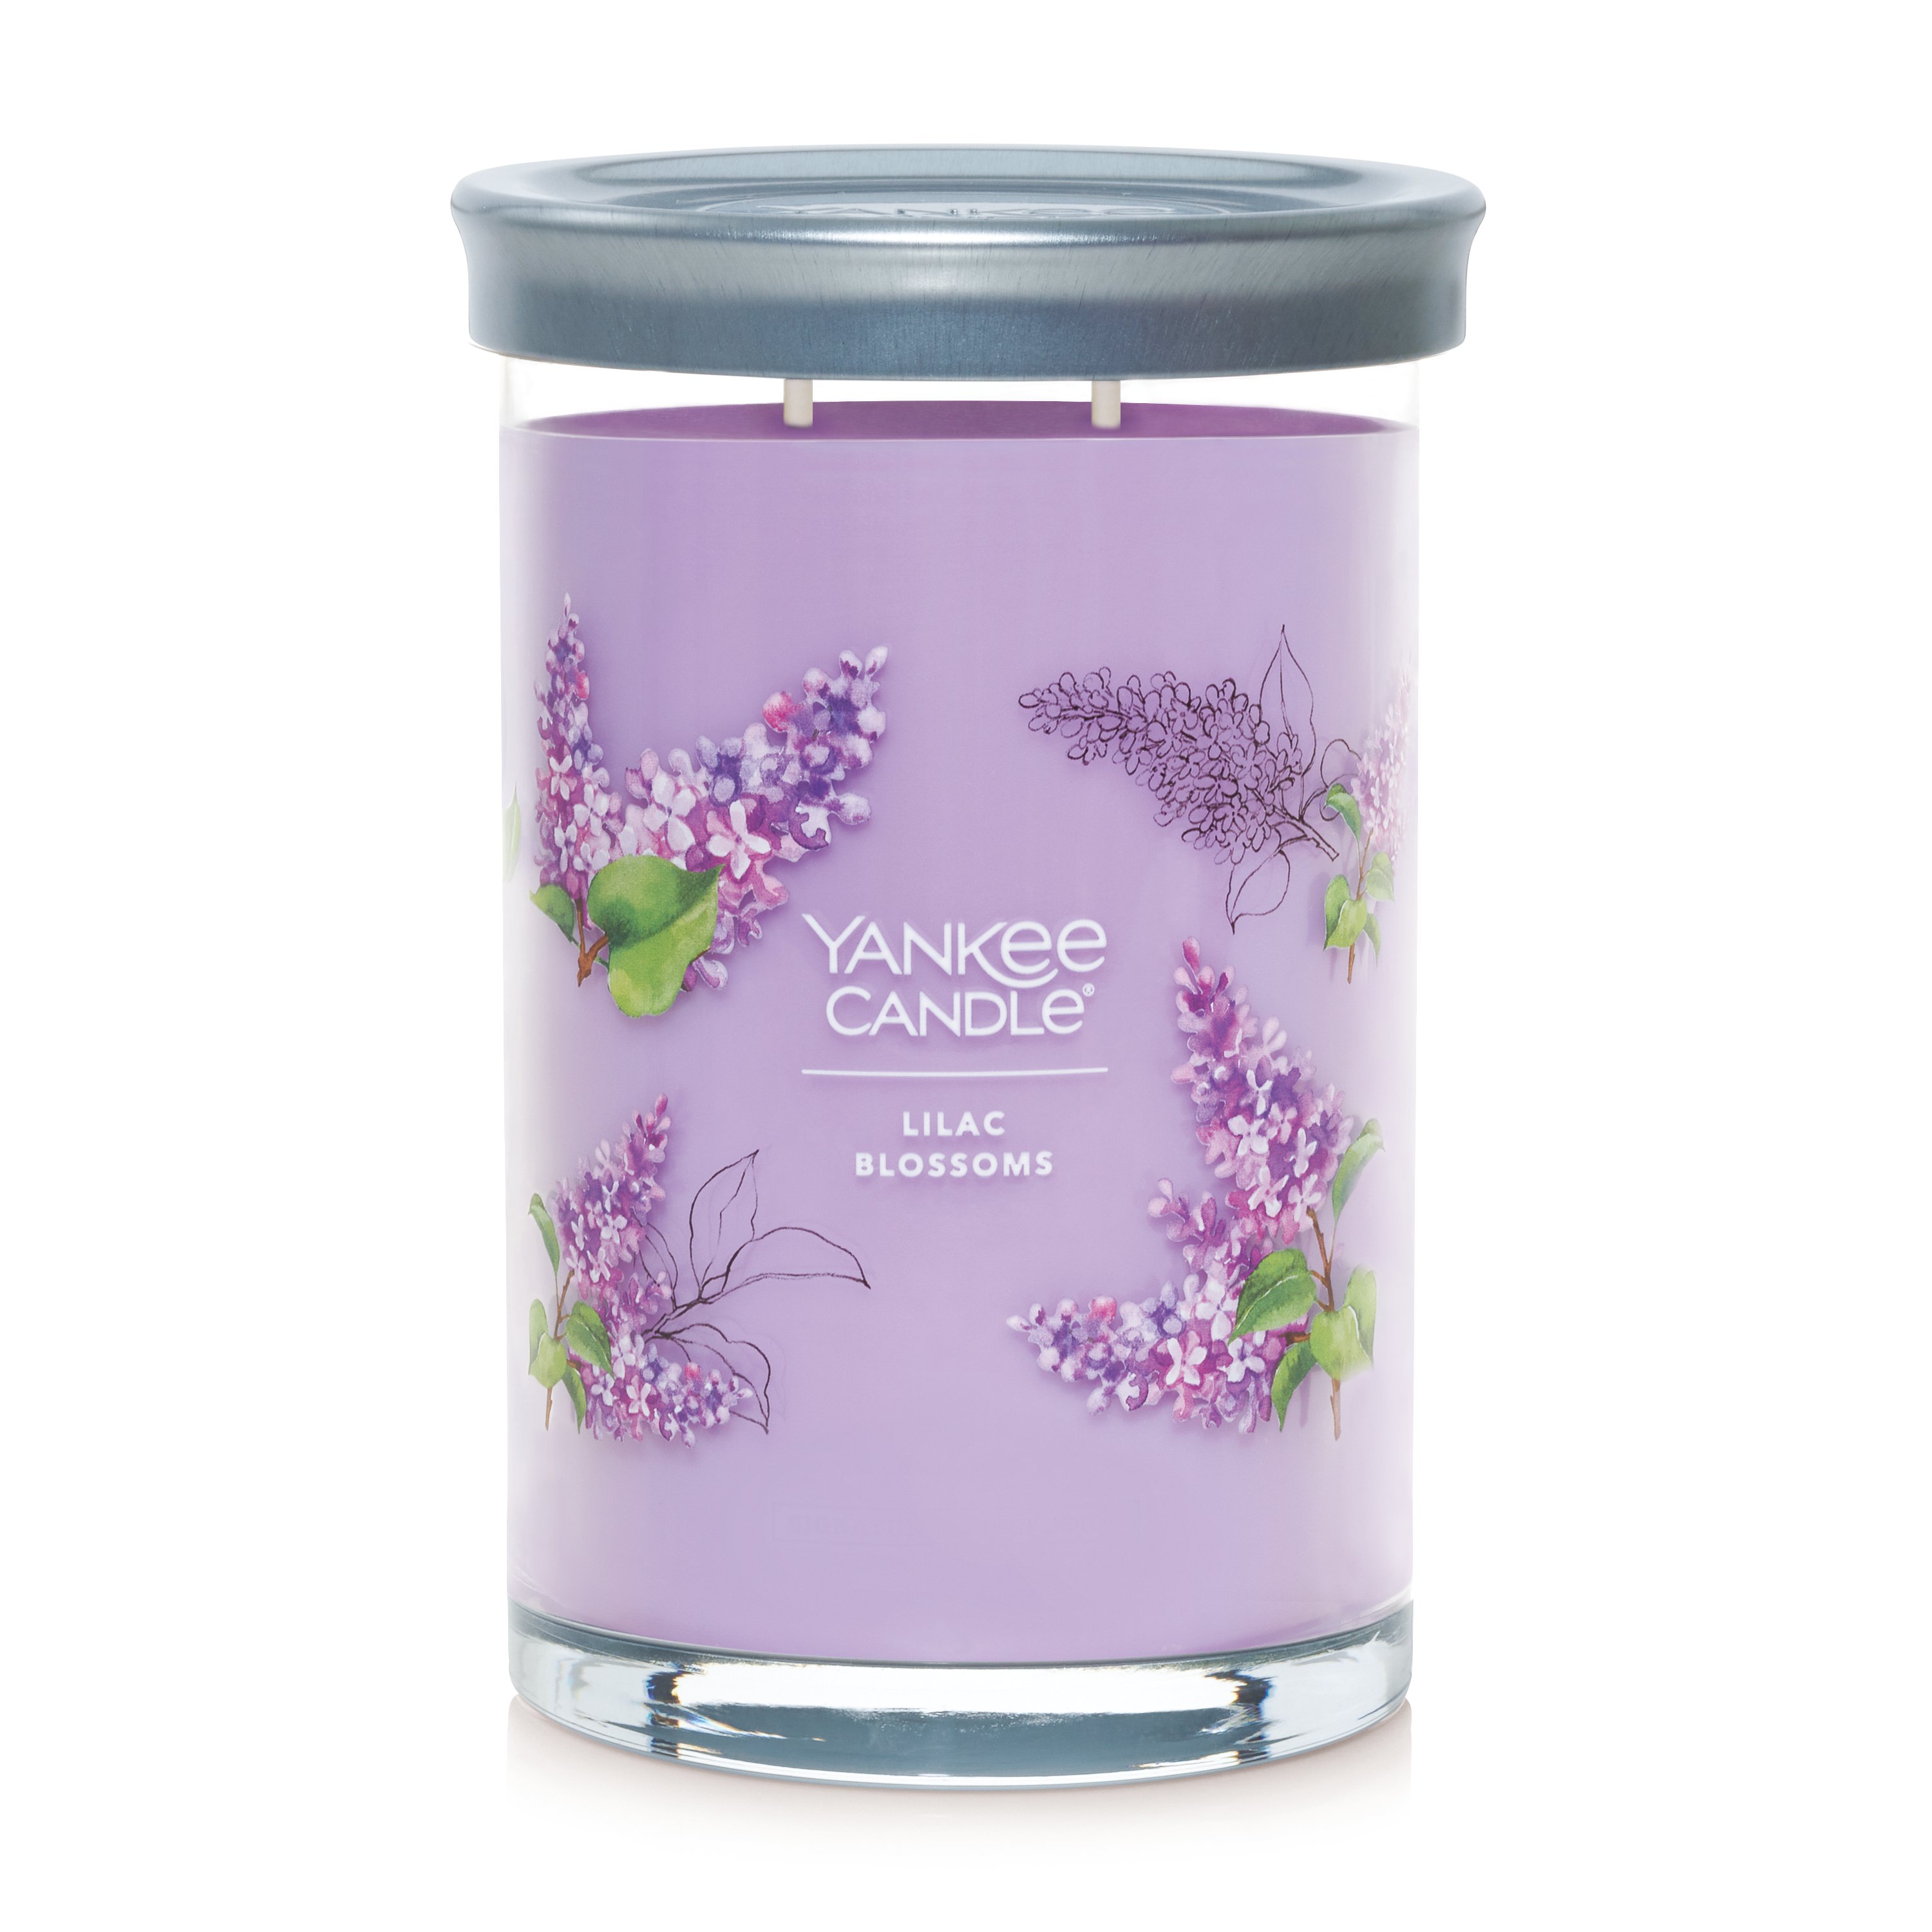 22 oz 1 SINGLE NEW  Free Ship. Yankee Candle Lilac Blossoms 